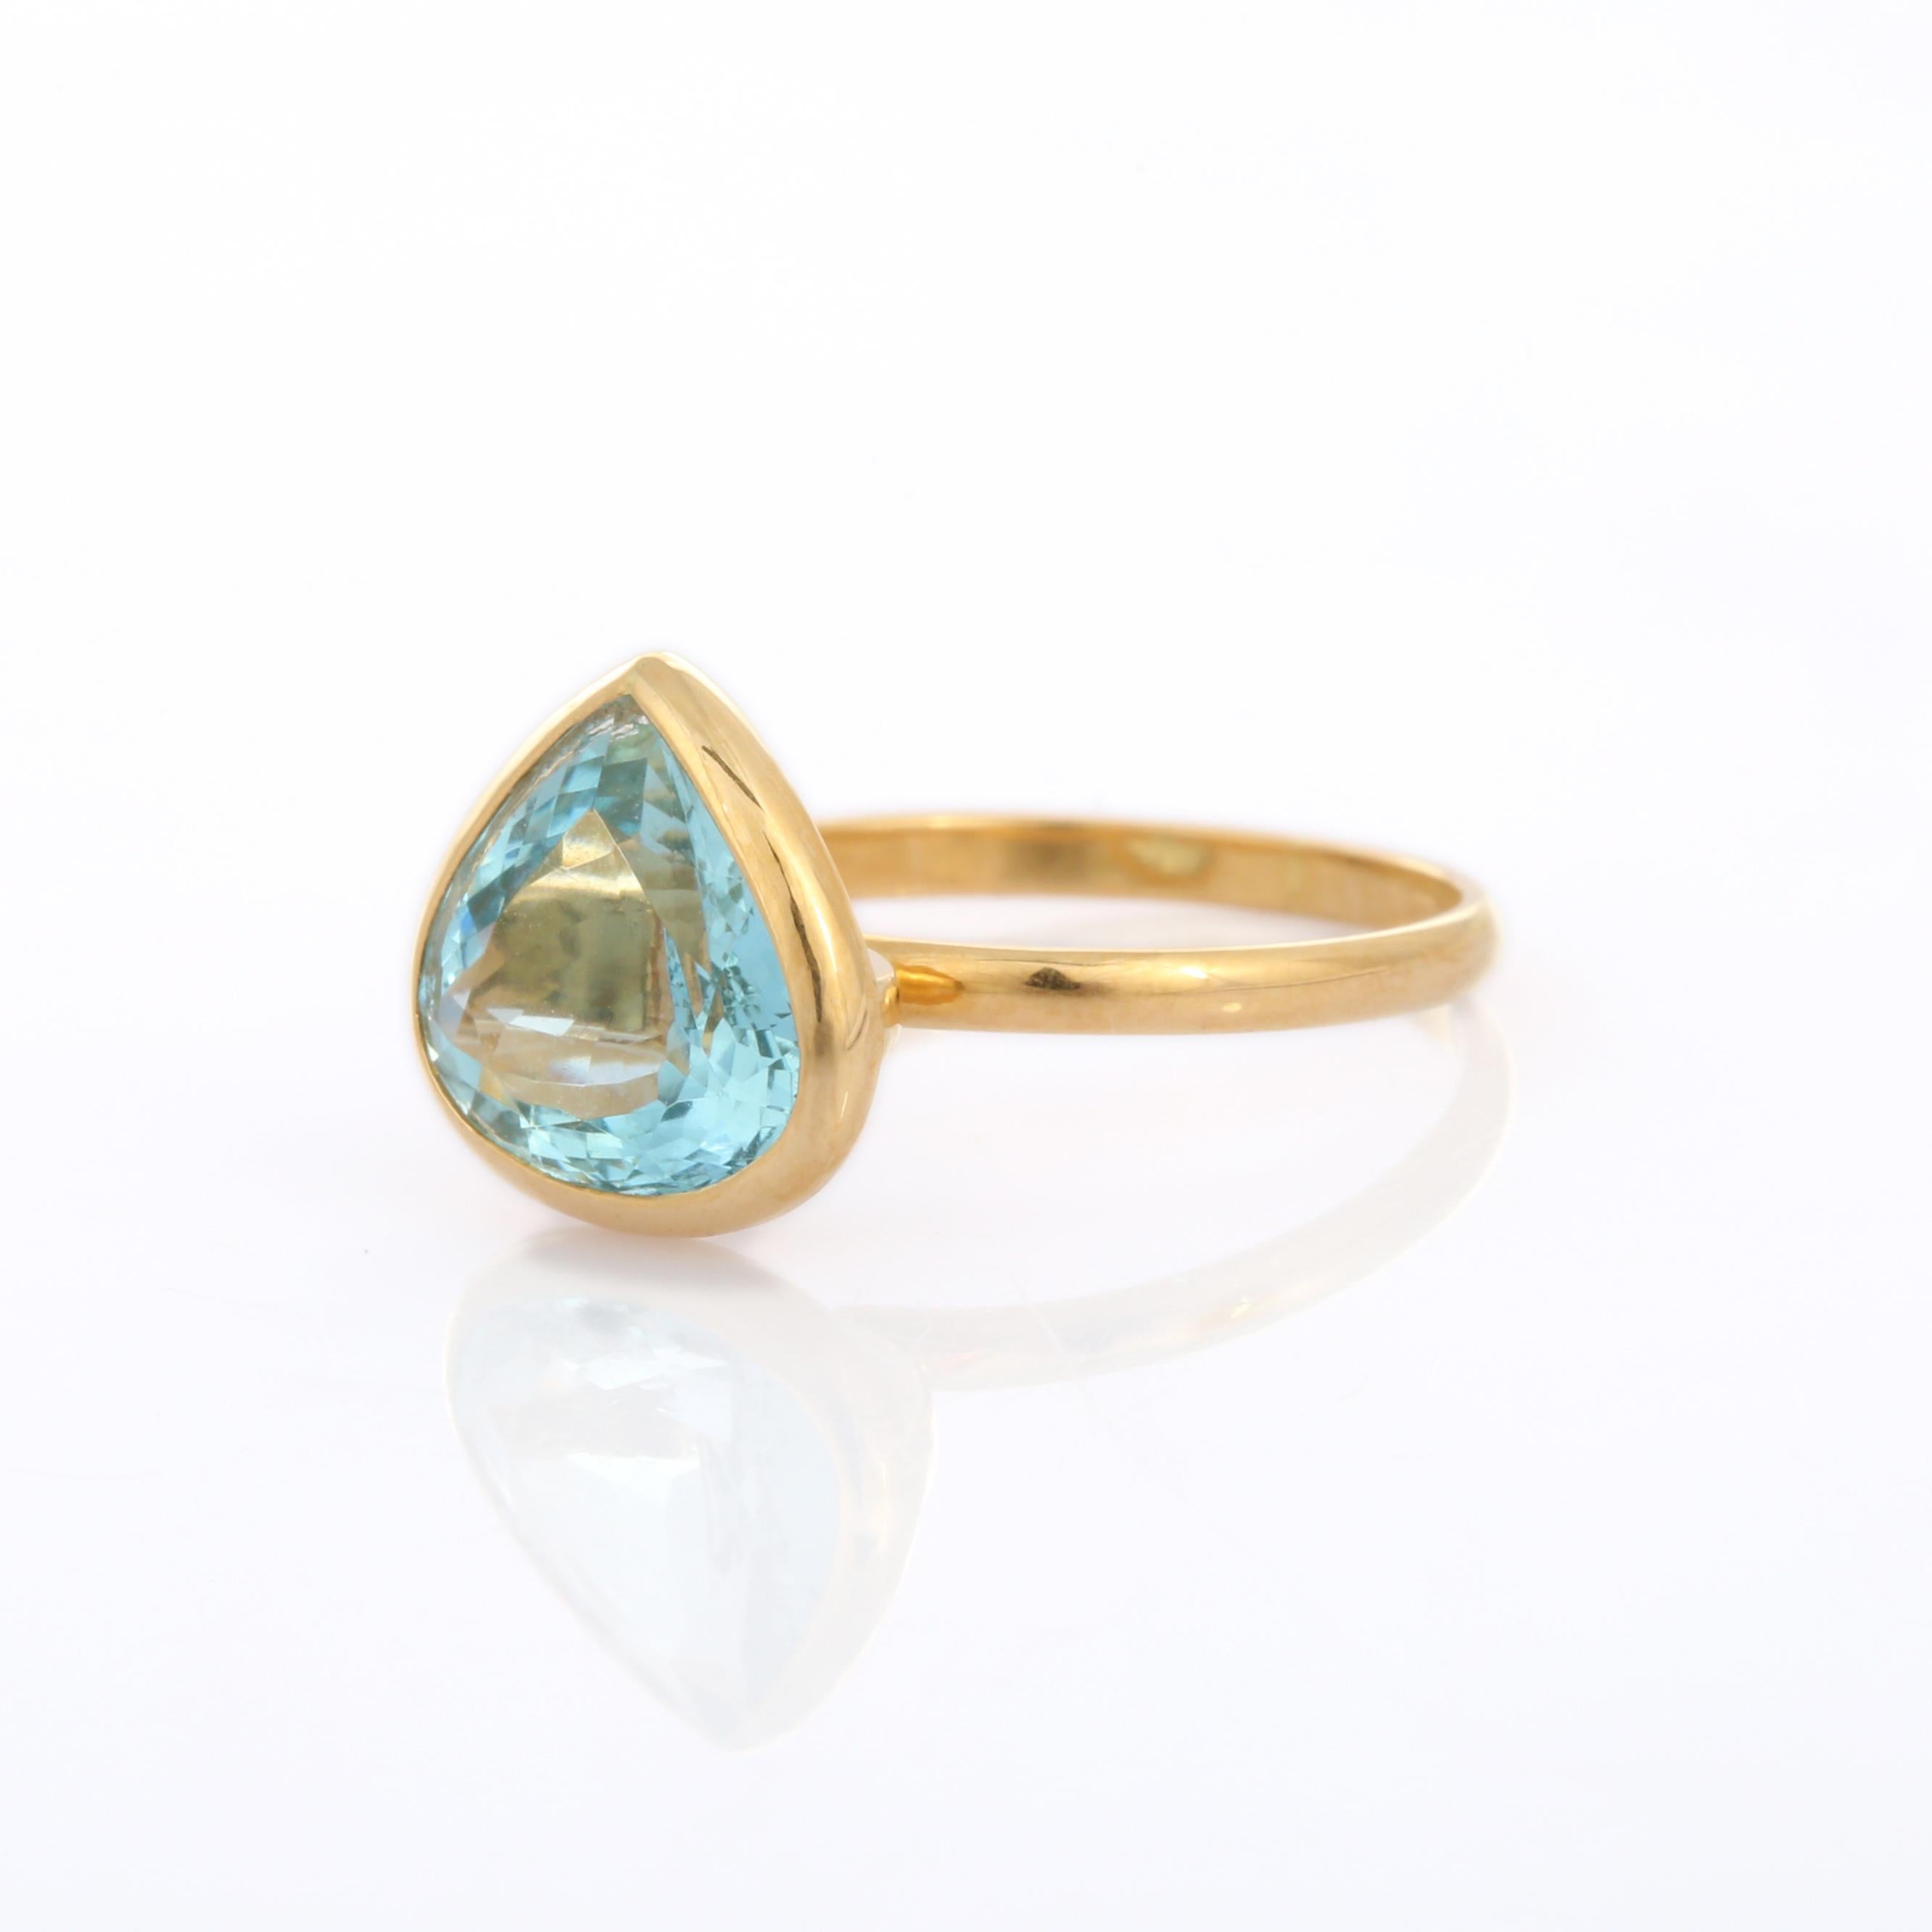 For Sale:  18K Yellow Gold Pear Cut Aquamarine Solitaire Ring 4